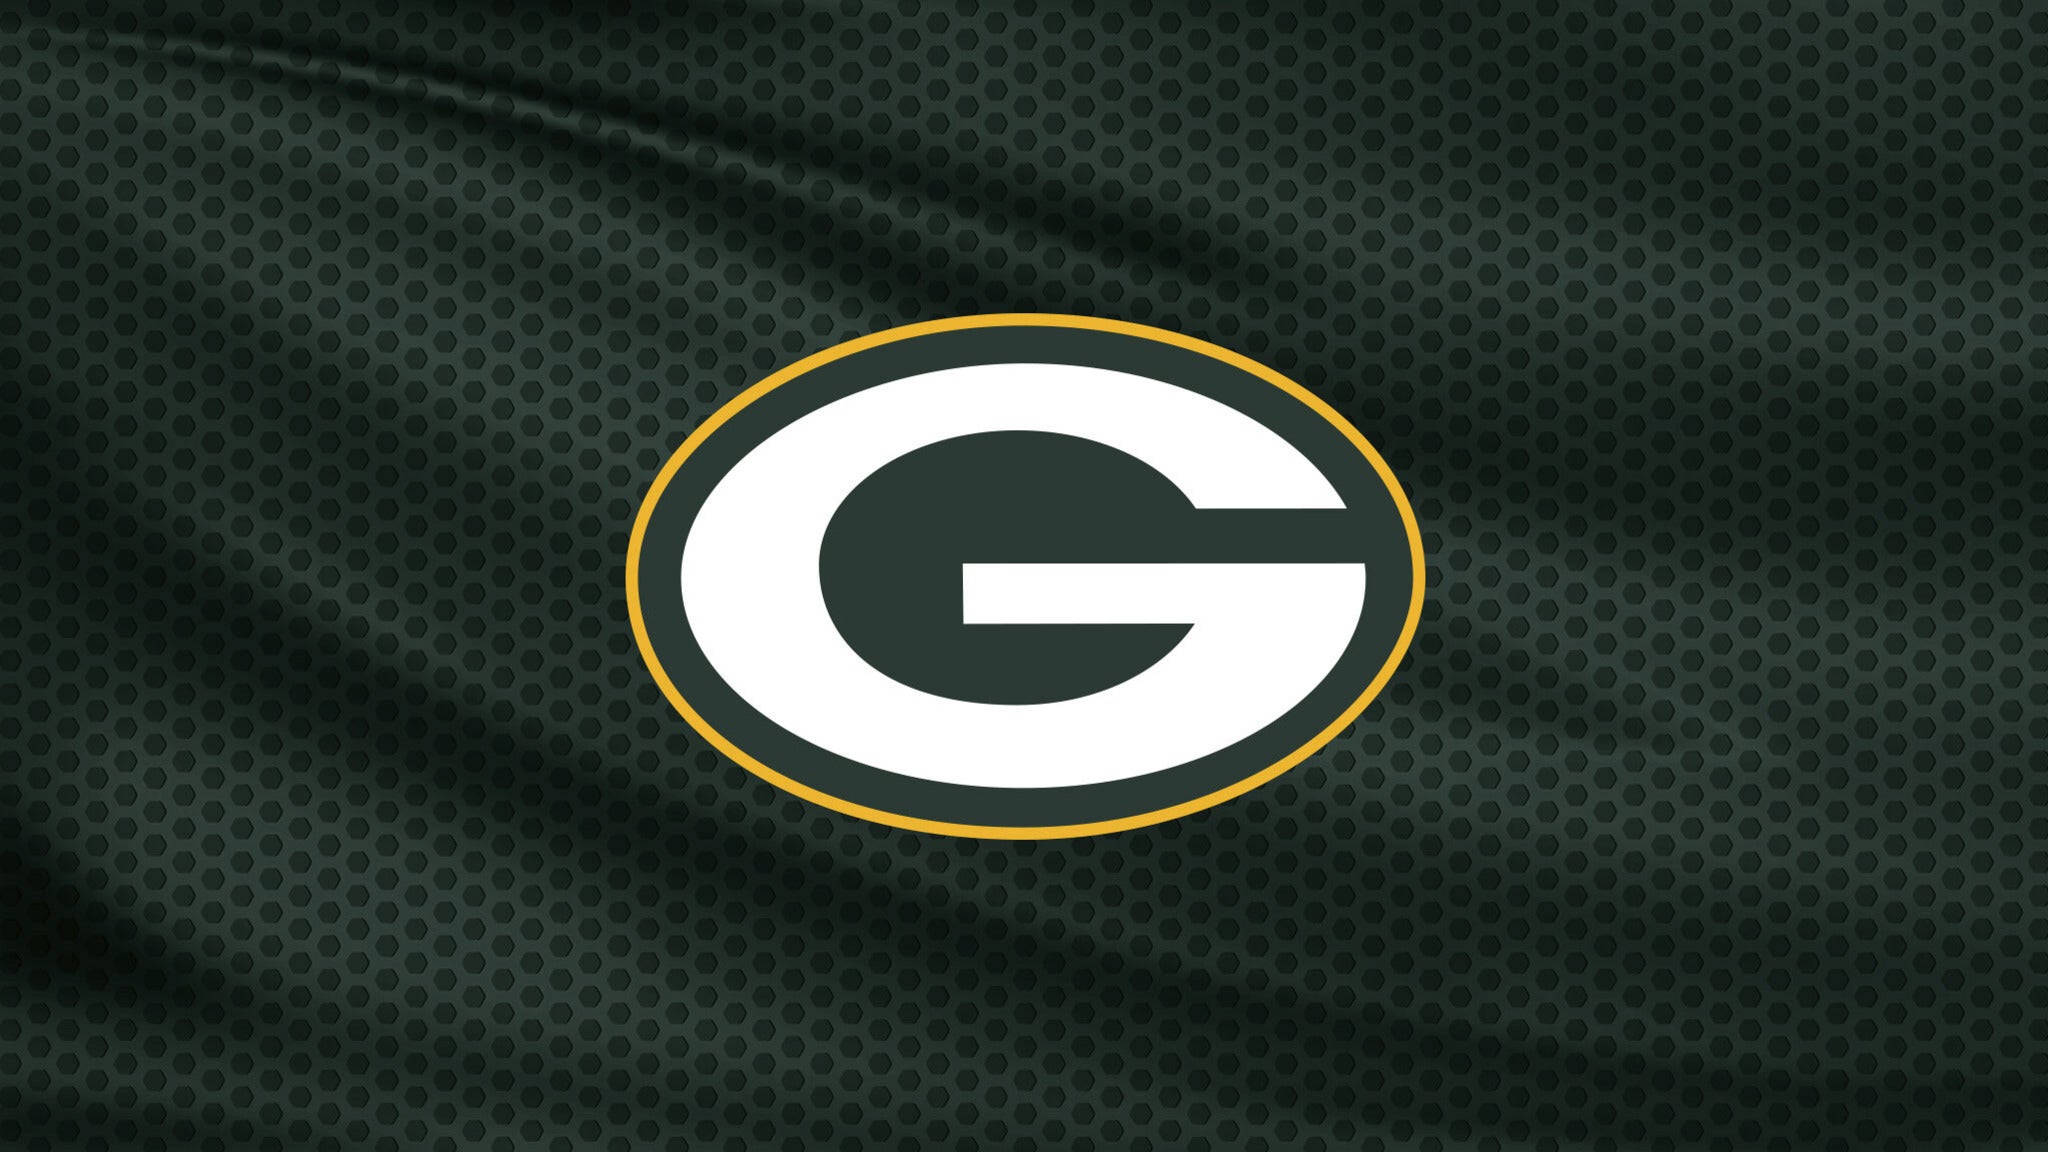 green bay packers sign